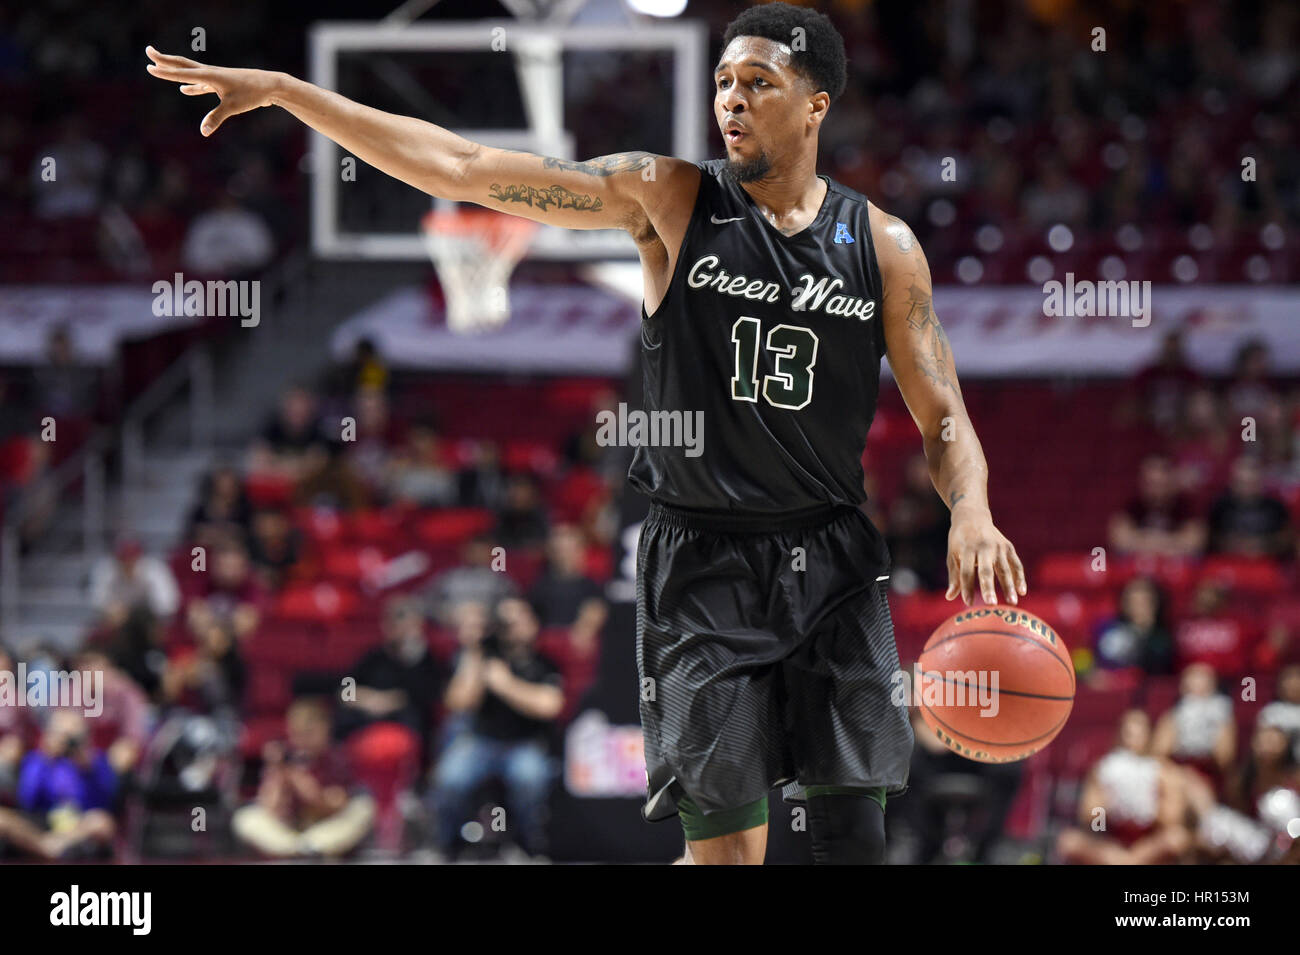 February 25, 2017 - Philadelphia, Pennsylvania, U.S - Tulane Green Wave guard MALIK MORGAN (13) during the American Athletic Conference basketball game being played at the Liacouras Center in Philadelphia. Temple beat Tulane 86-76 in double overtime. (Credit Image: © Ken Inness via ZUMA Wire) Stock Photo